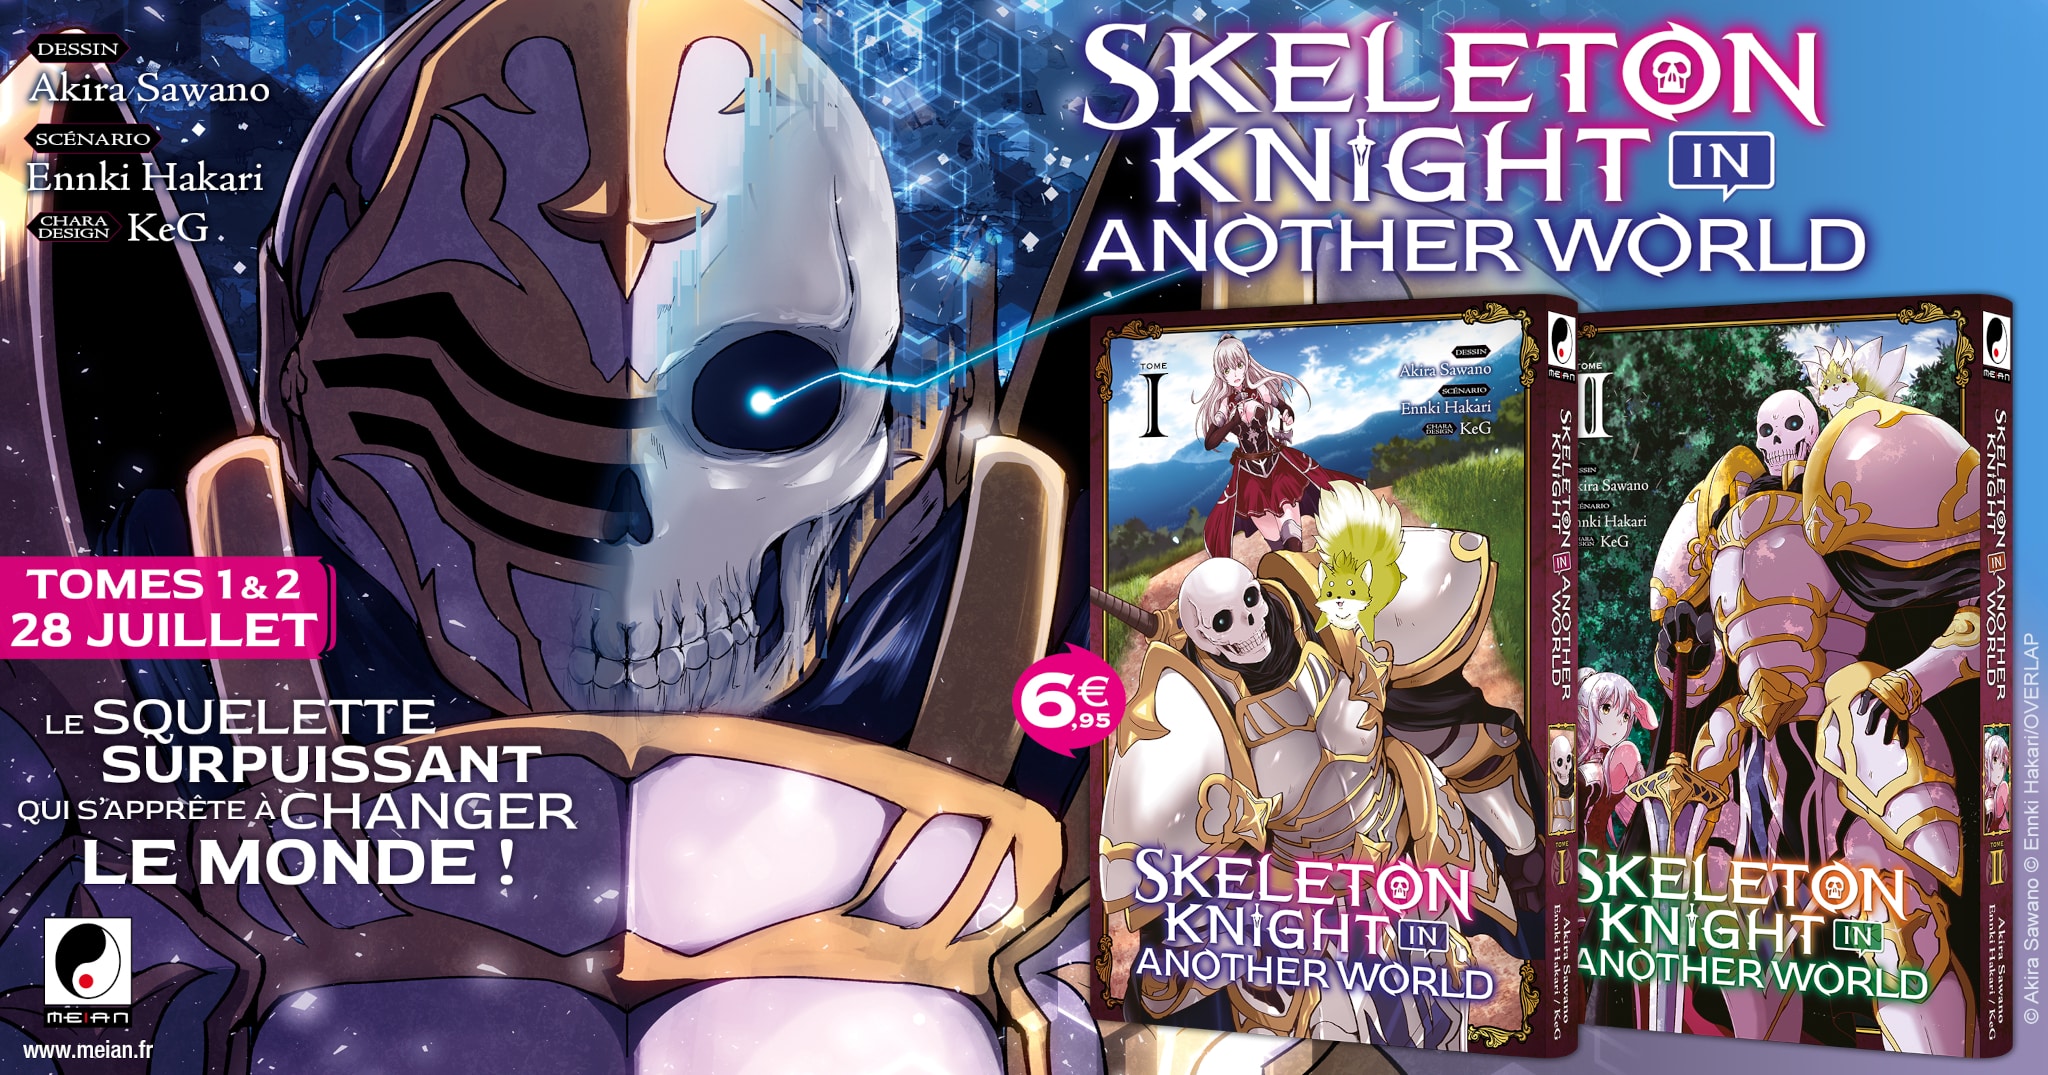 Annonce du manga Skeleton Knight in another world aux éditions Meian